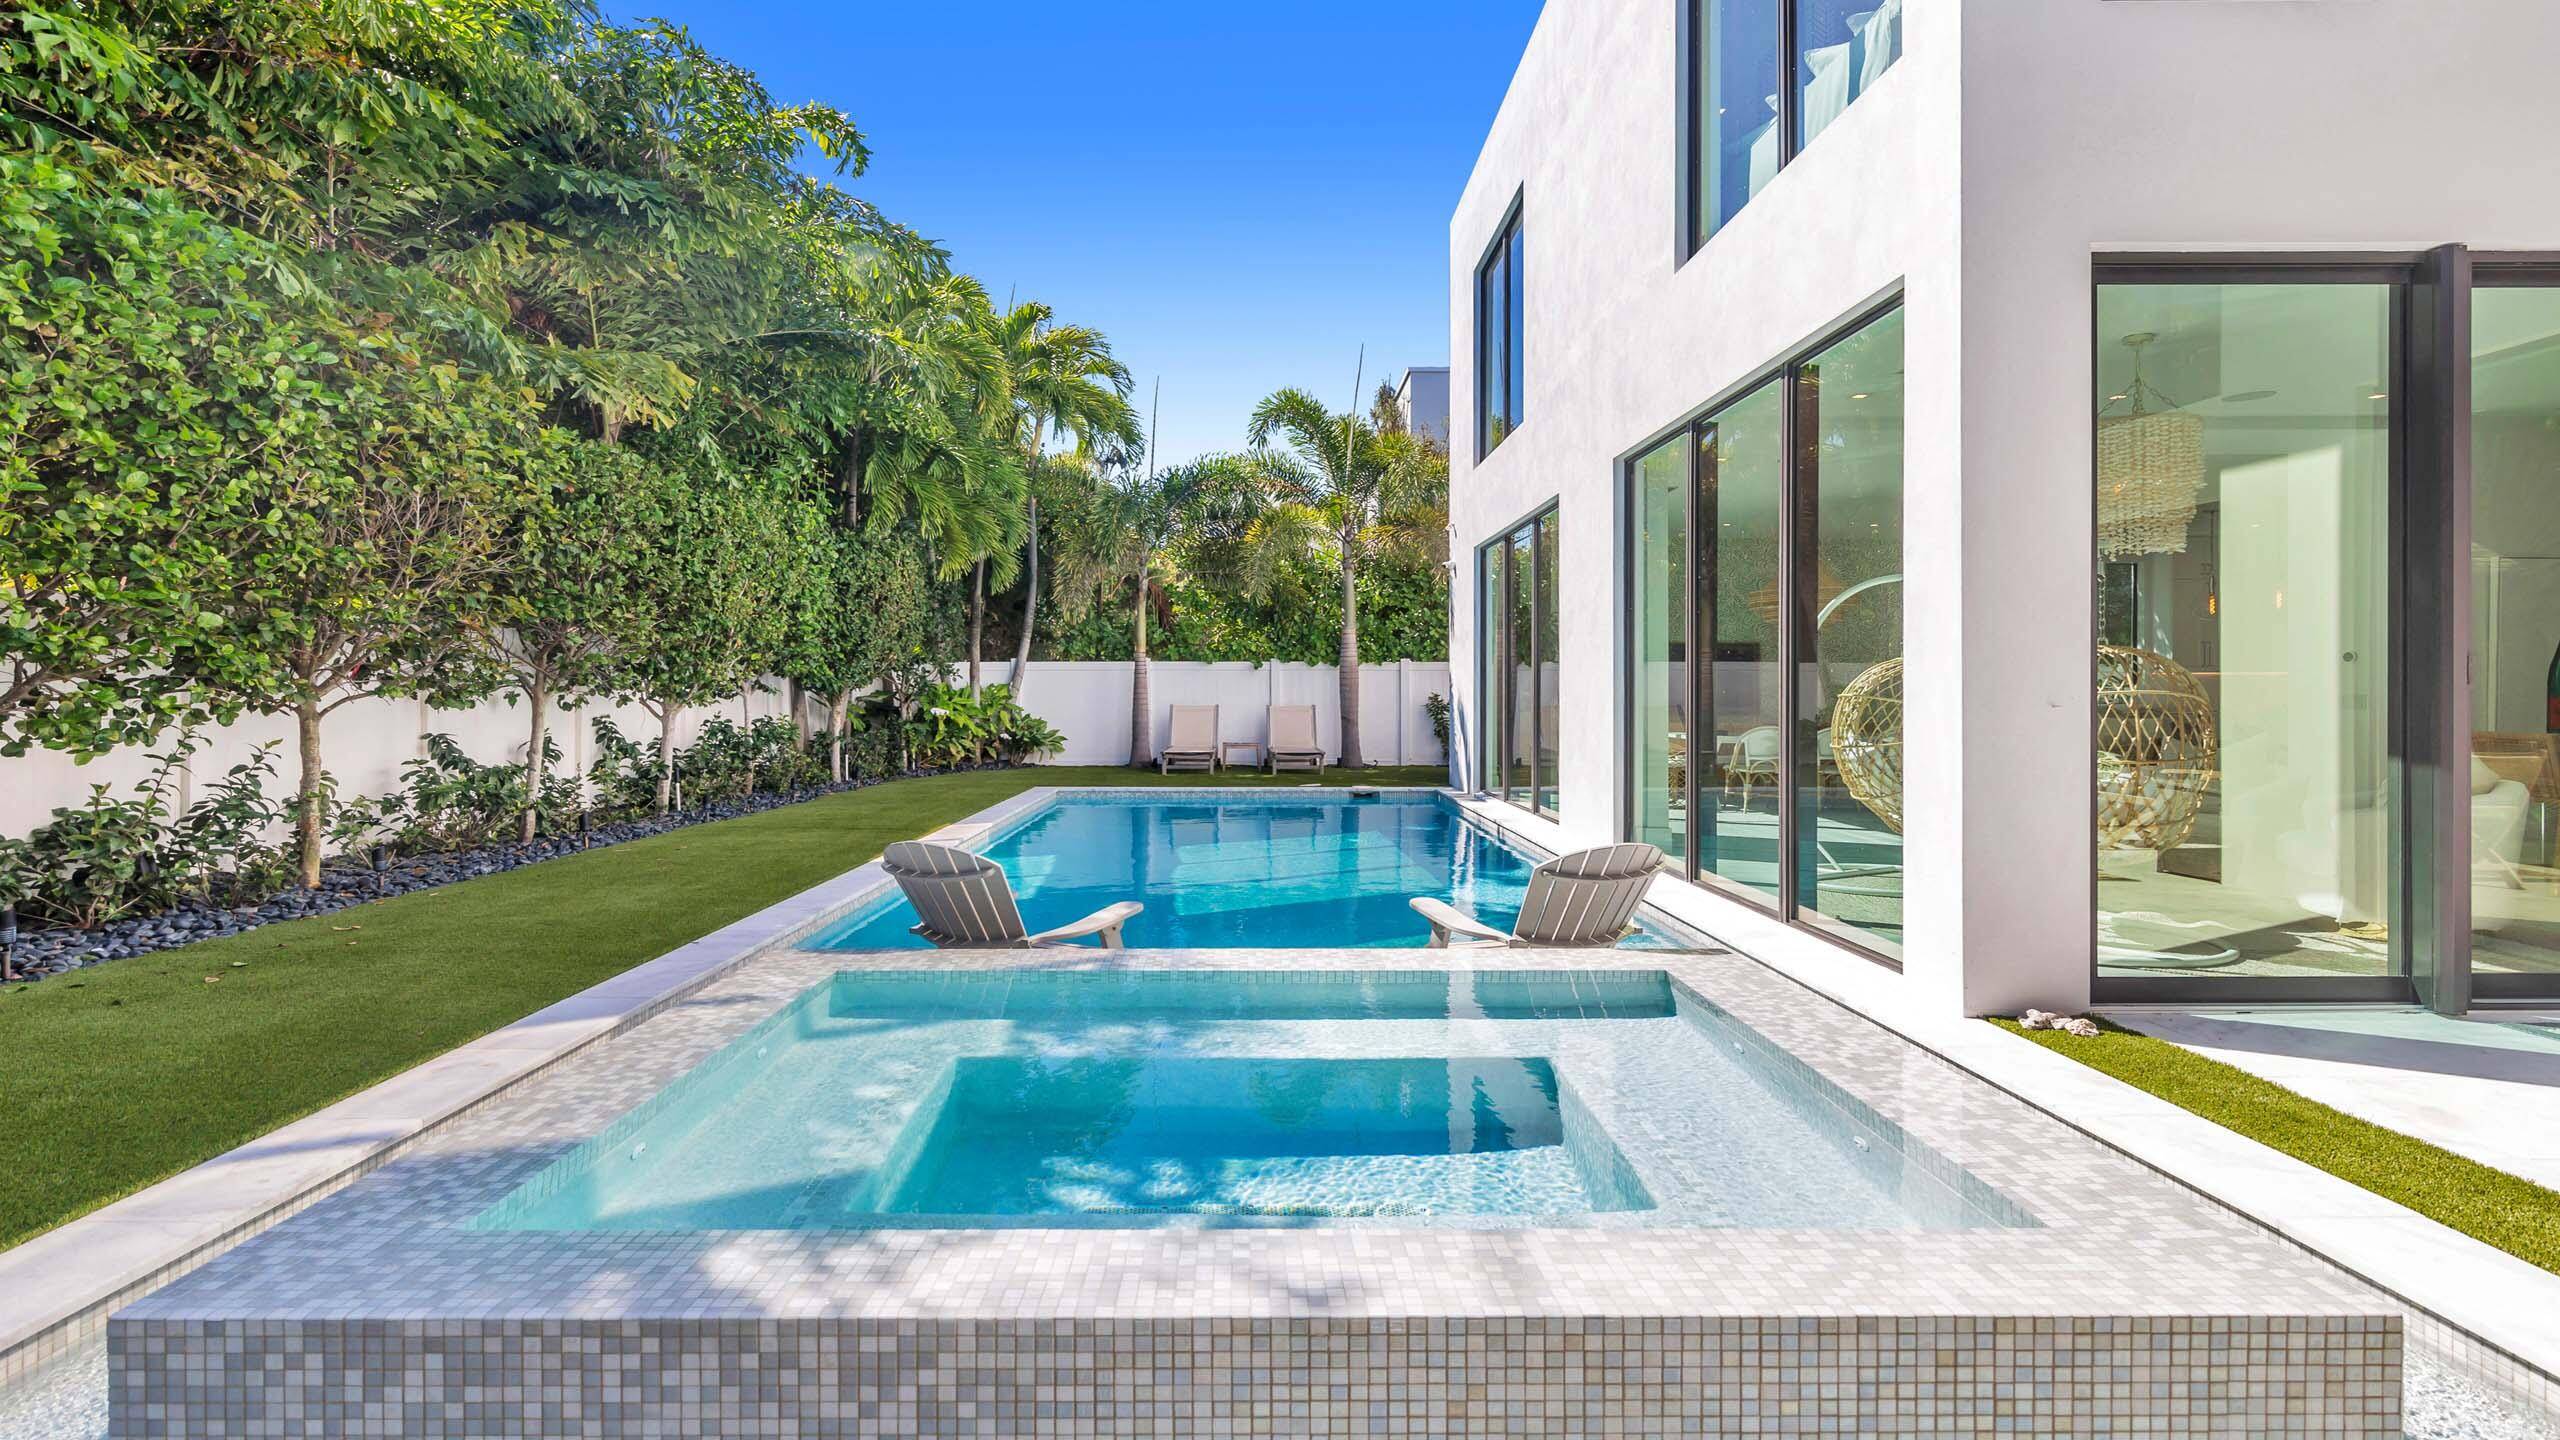 Built in 2021, this incredible contemporary residence is located in Boca Villas just one block from the famed Mizner Park and one mile to the beach.